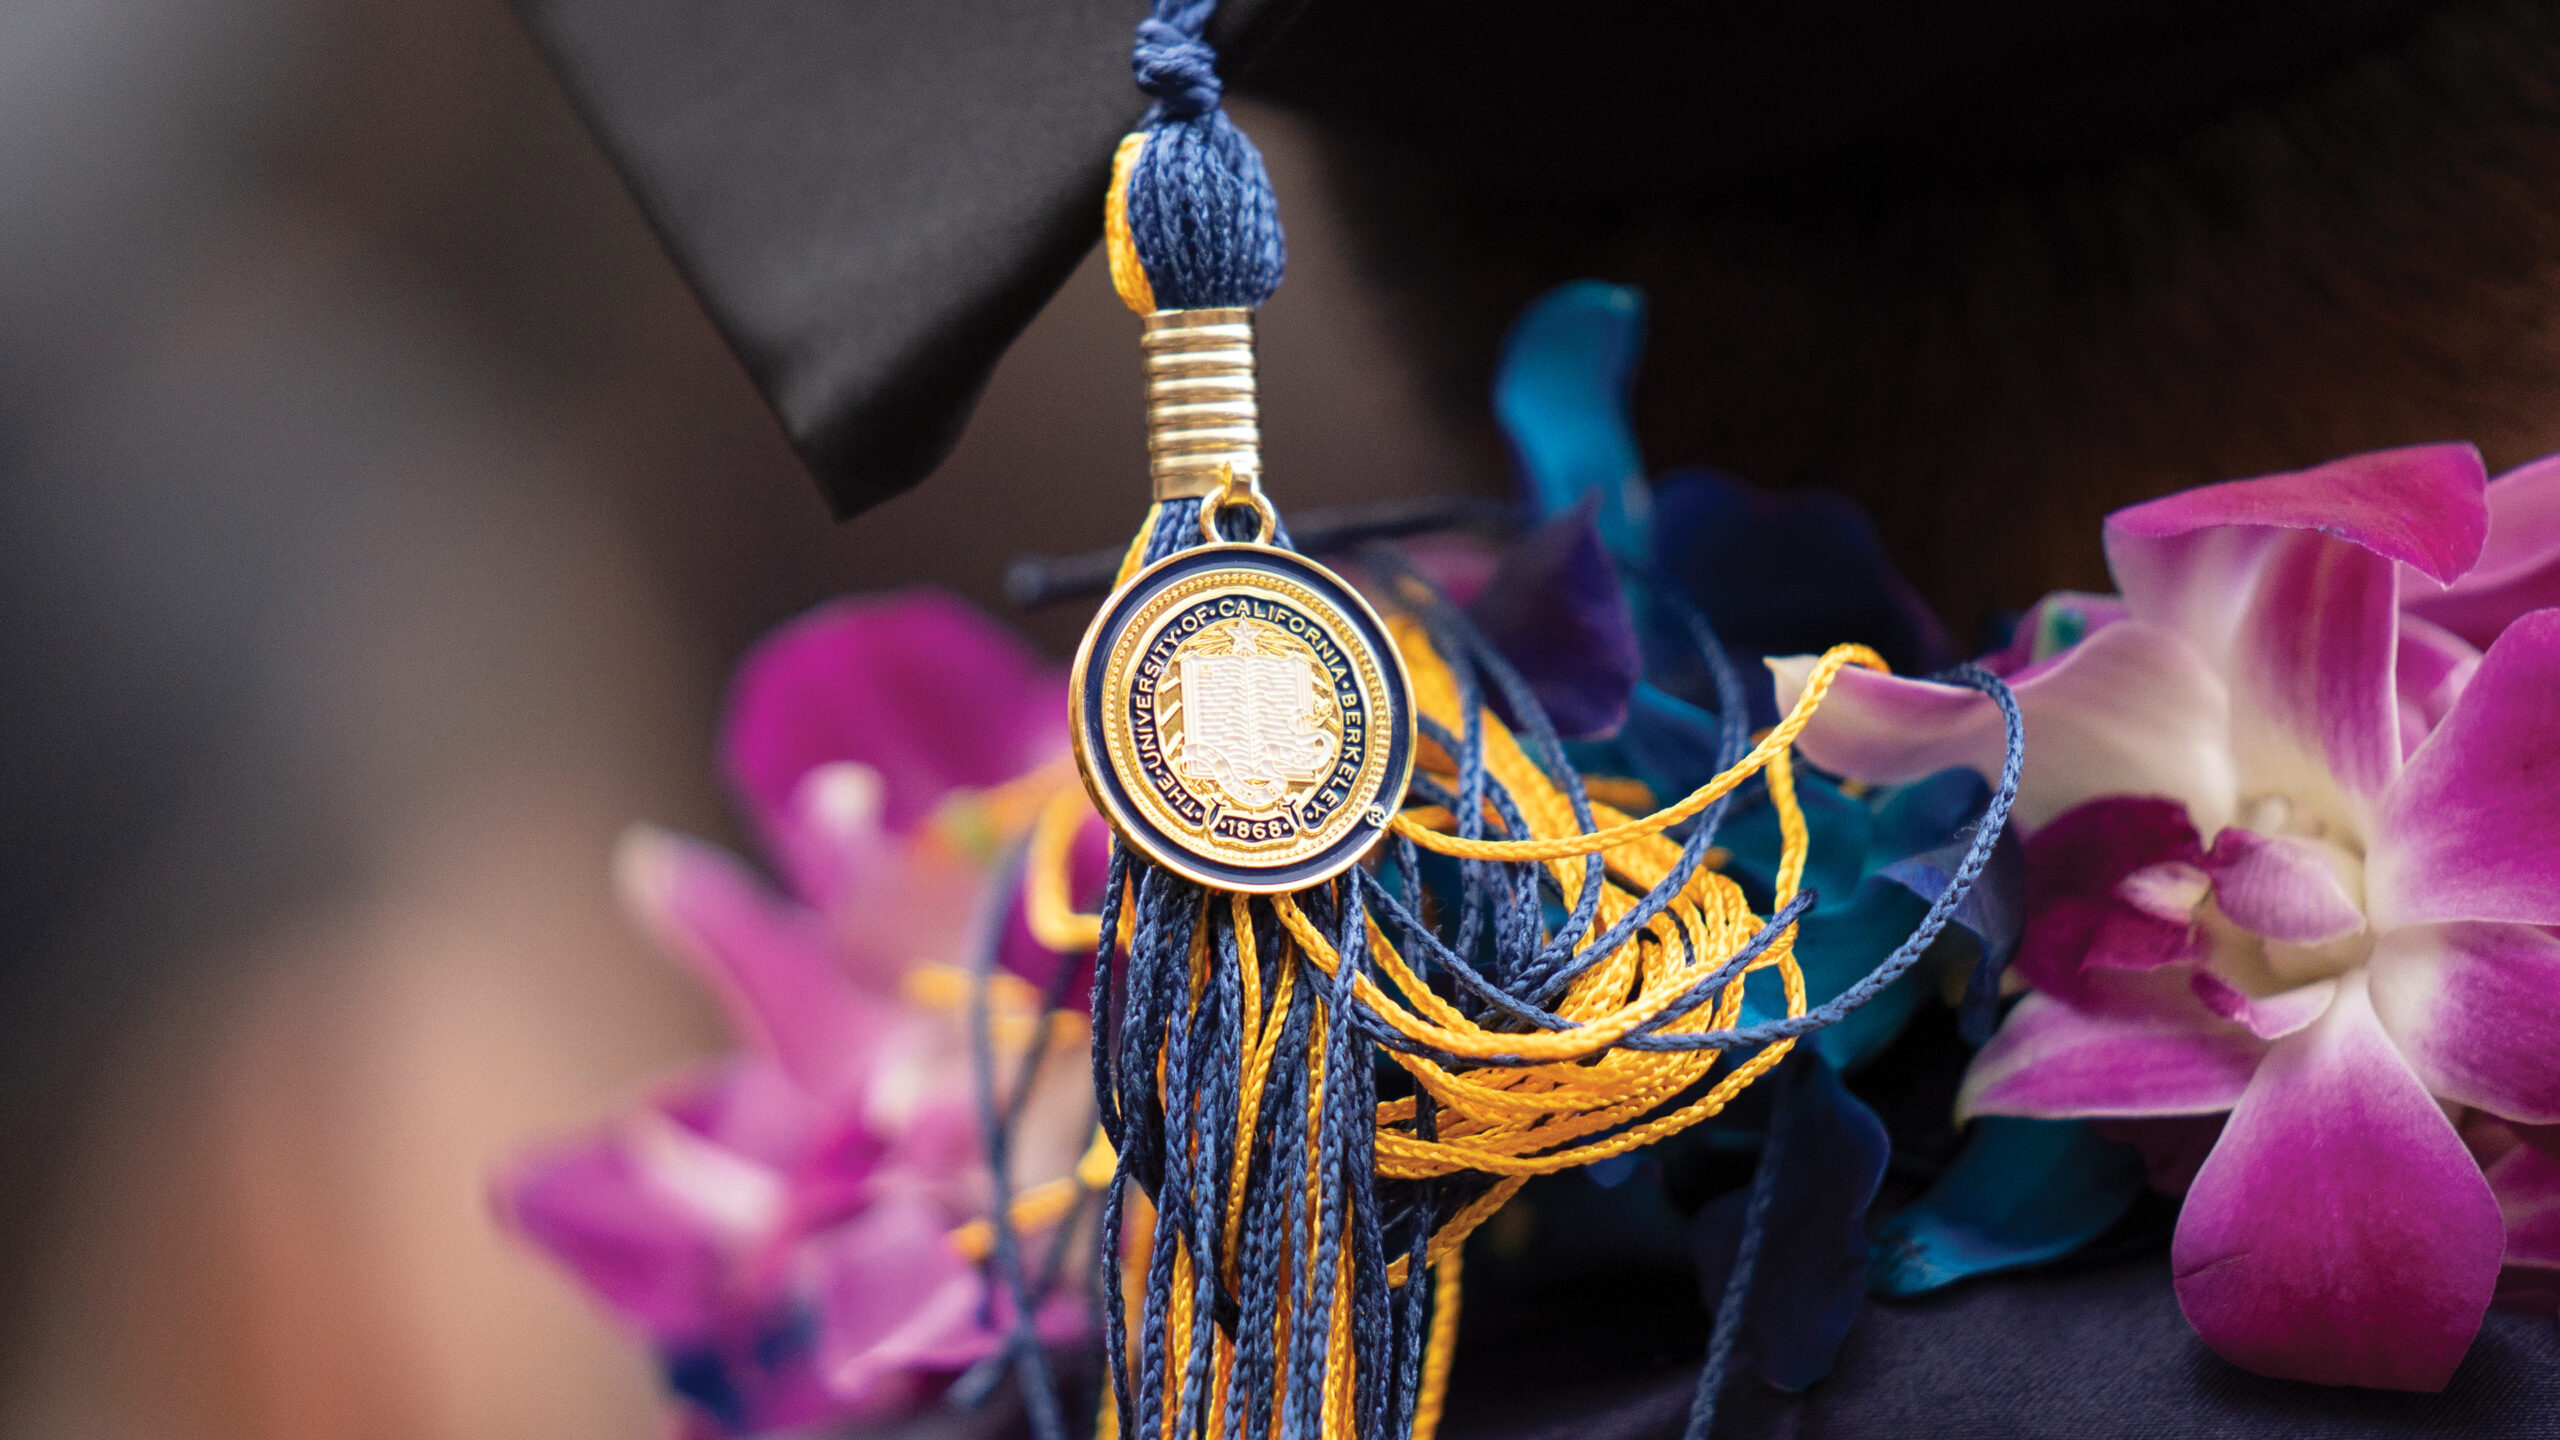 Detail of UC Berkeley seal on a tassel during the College of Engineering commencement